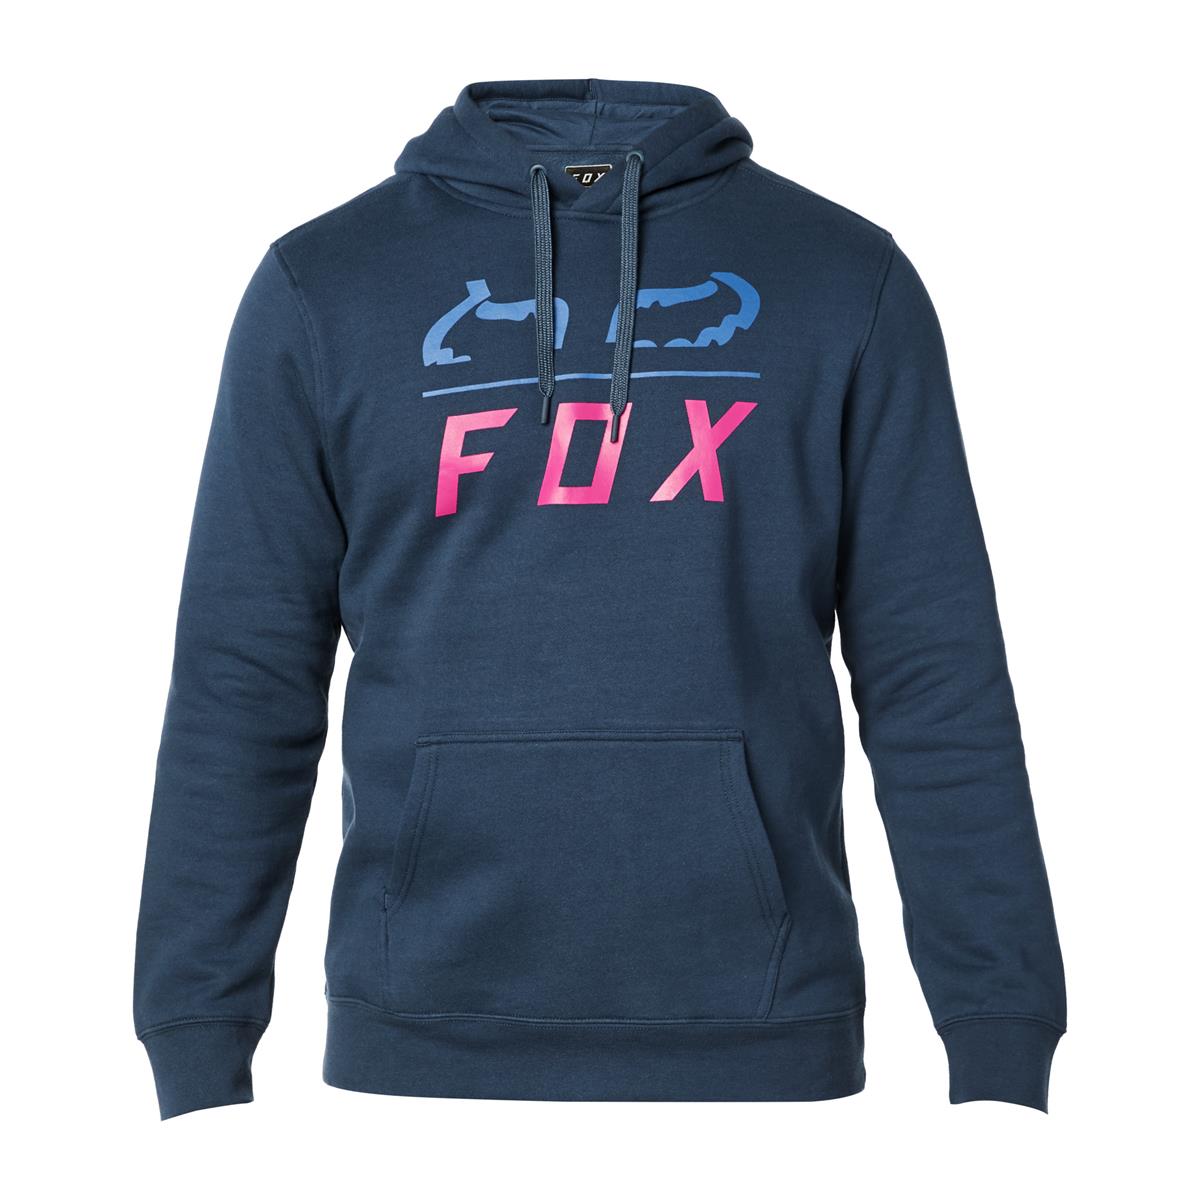 Fox Hoody Furnace Limited Edition A1 - Navy